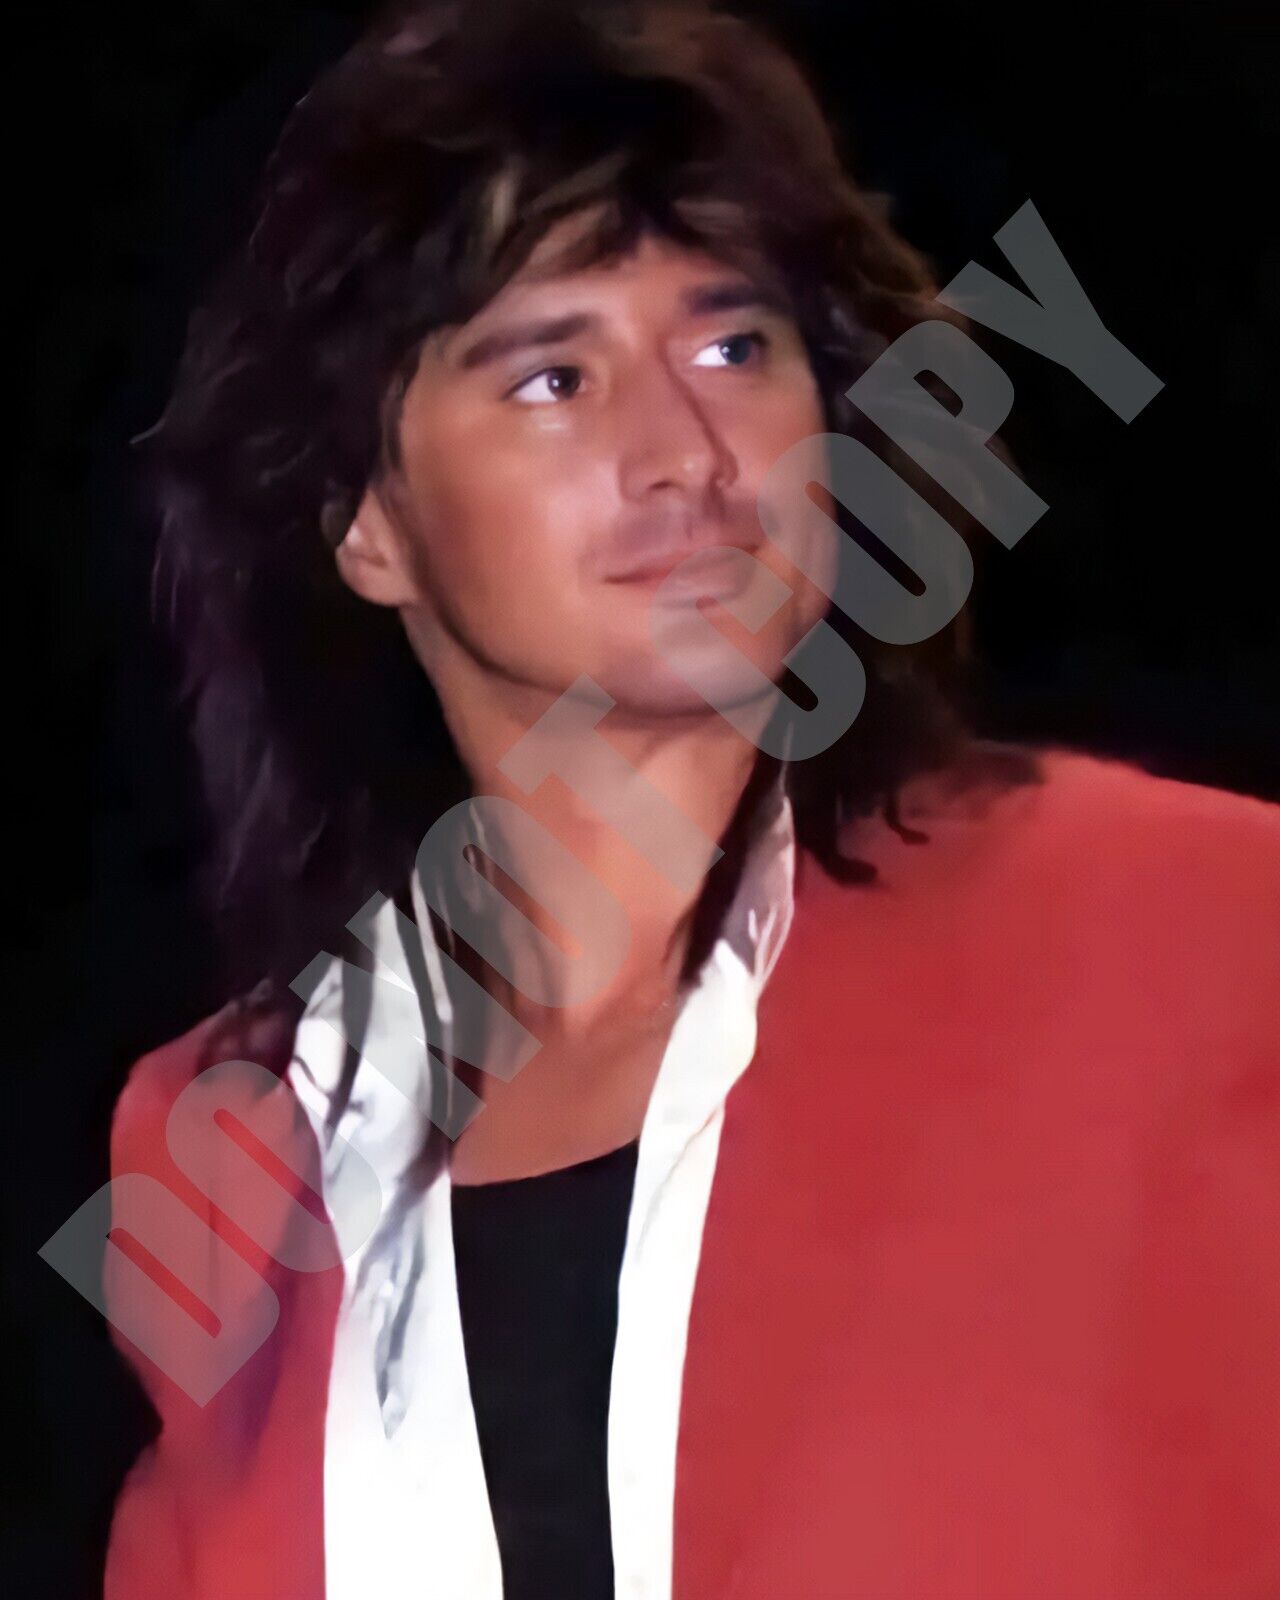 Steve Perry From Journey Dressed In Red During Concert 8x10 Photo